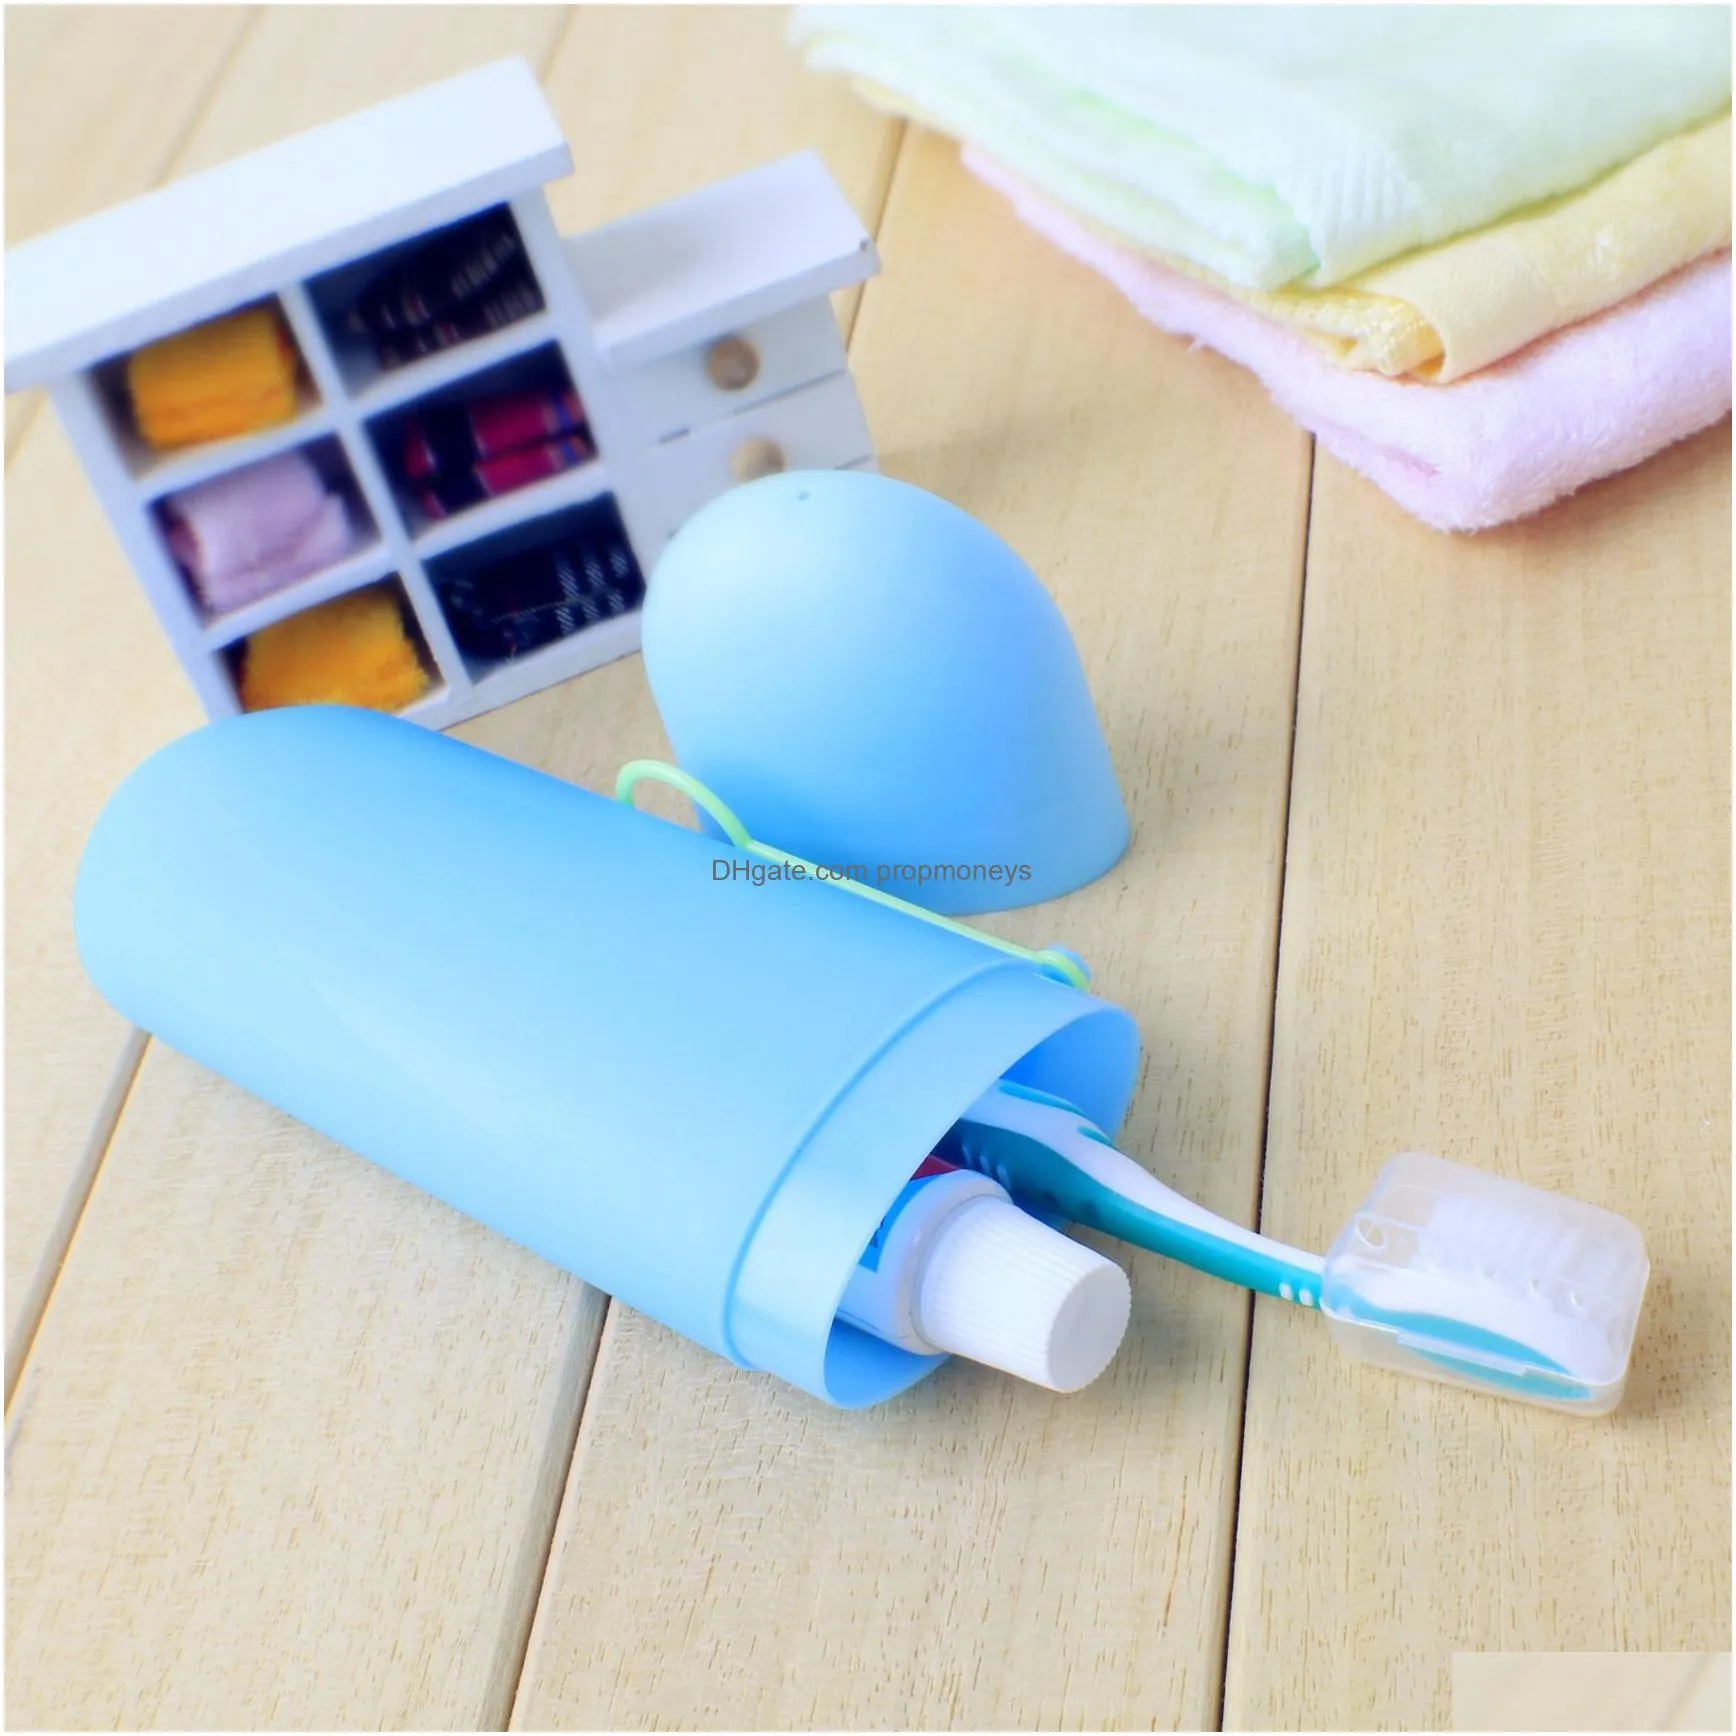 Cups, Dishes & Utensils Solid Colors Portable Travel Tootaste Toothbrush Holder Cap Case Household Storage Cup Outdoor Bothroom Access Dhvdi